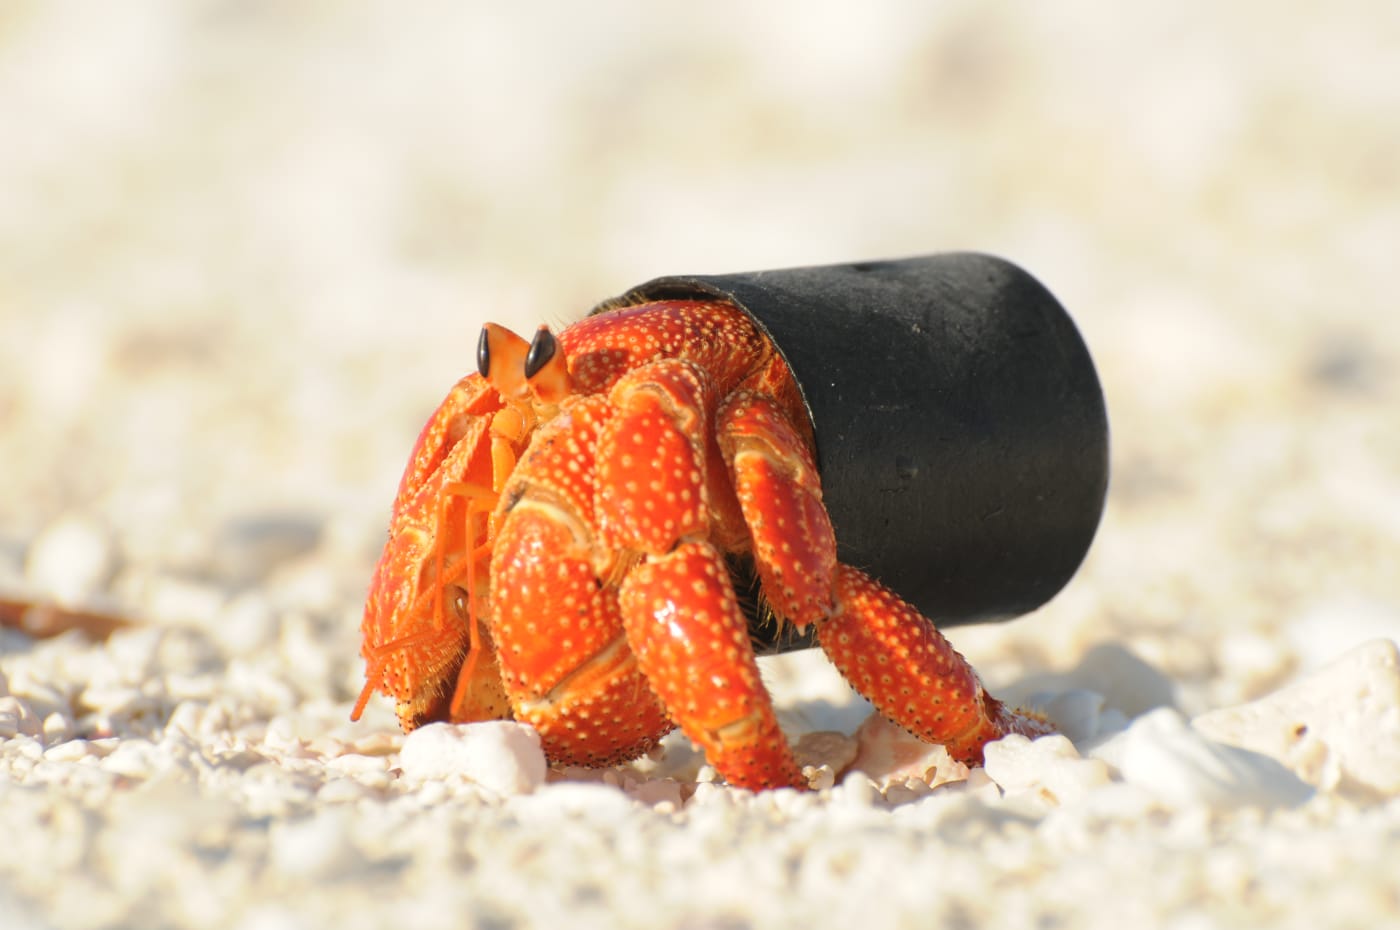 Strawberry hermit crab (Coenobita perlatus) with a plastic lid instead of a shell. This species of crab is a widespread scavenger across the Indo-Pacific.